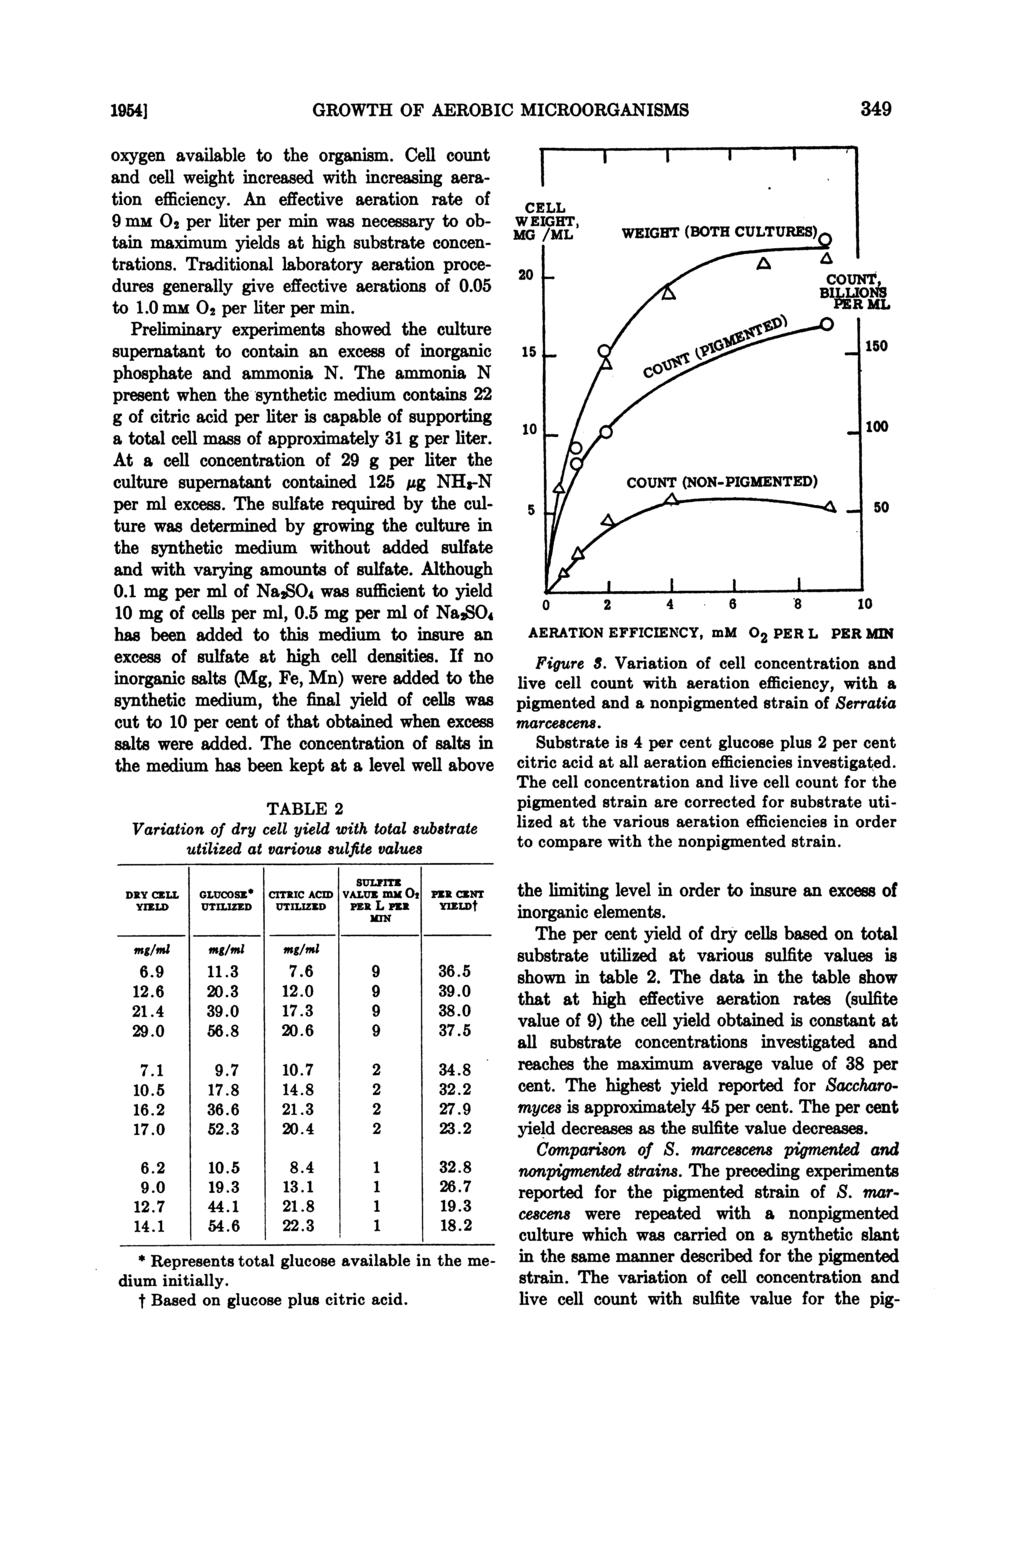 1954] GROWTH OF AEROBIC MICROORGANISMS oxygen available to the organism. Cell count and cell weight increased with increasing aeration efficiency.